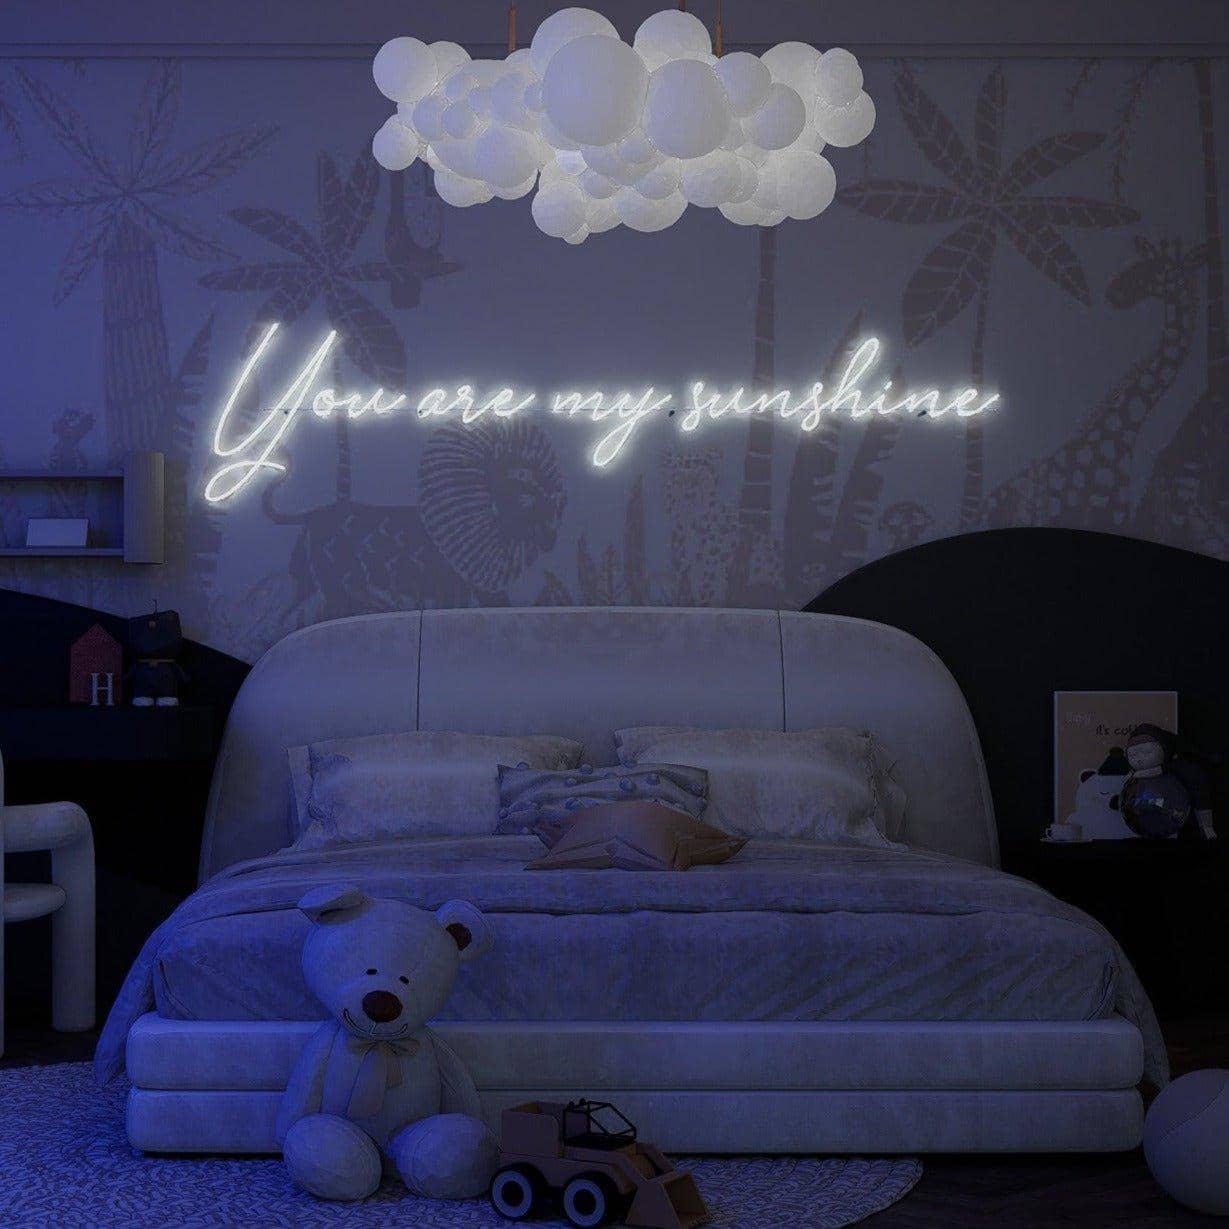 frontal-shot-of-illuminated-white-neon-lights-hanging-on-the-wall-you-are-my-sunshine